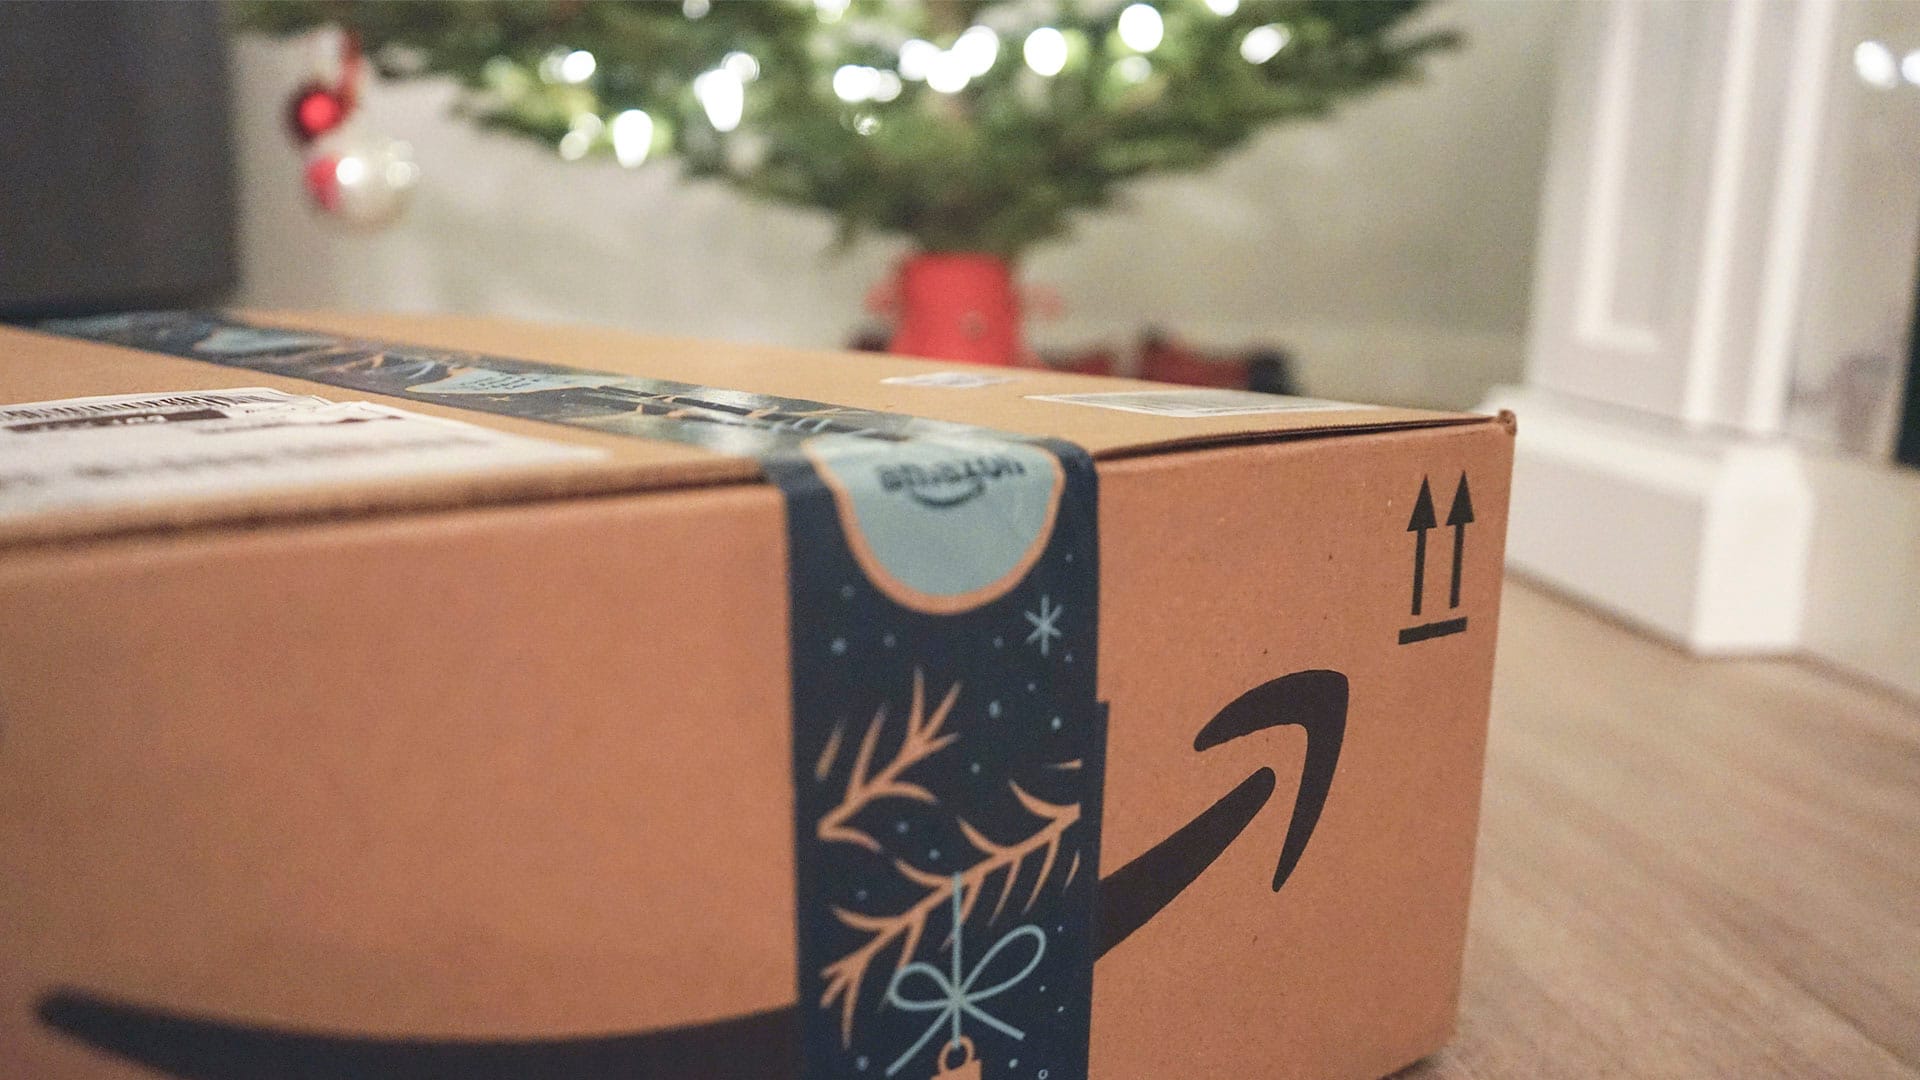 How To Return Amazon Gifts Without the Sender Knowing (or If You Lost the Receipt)